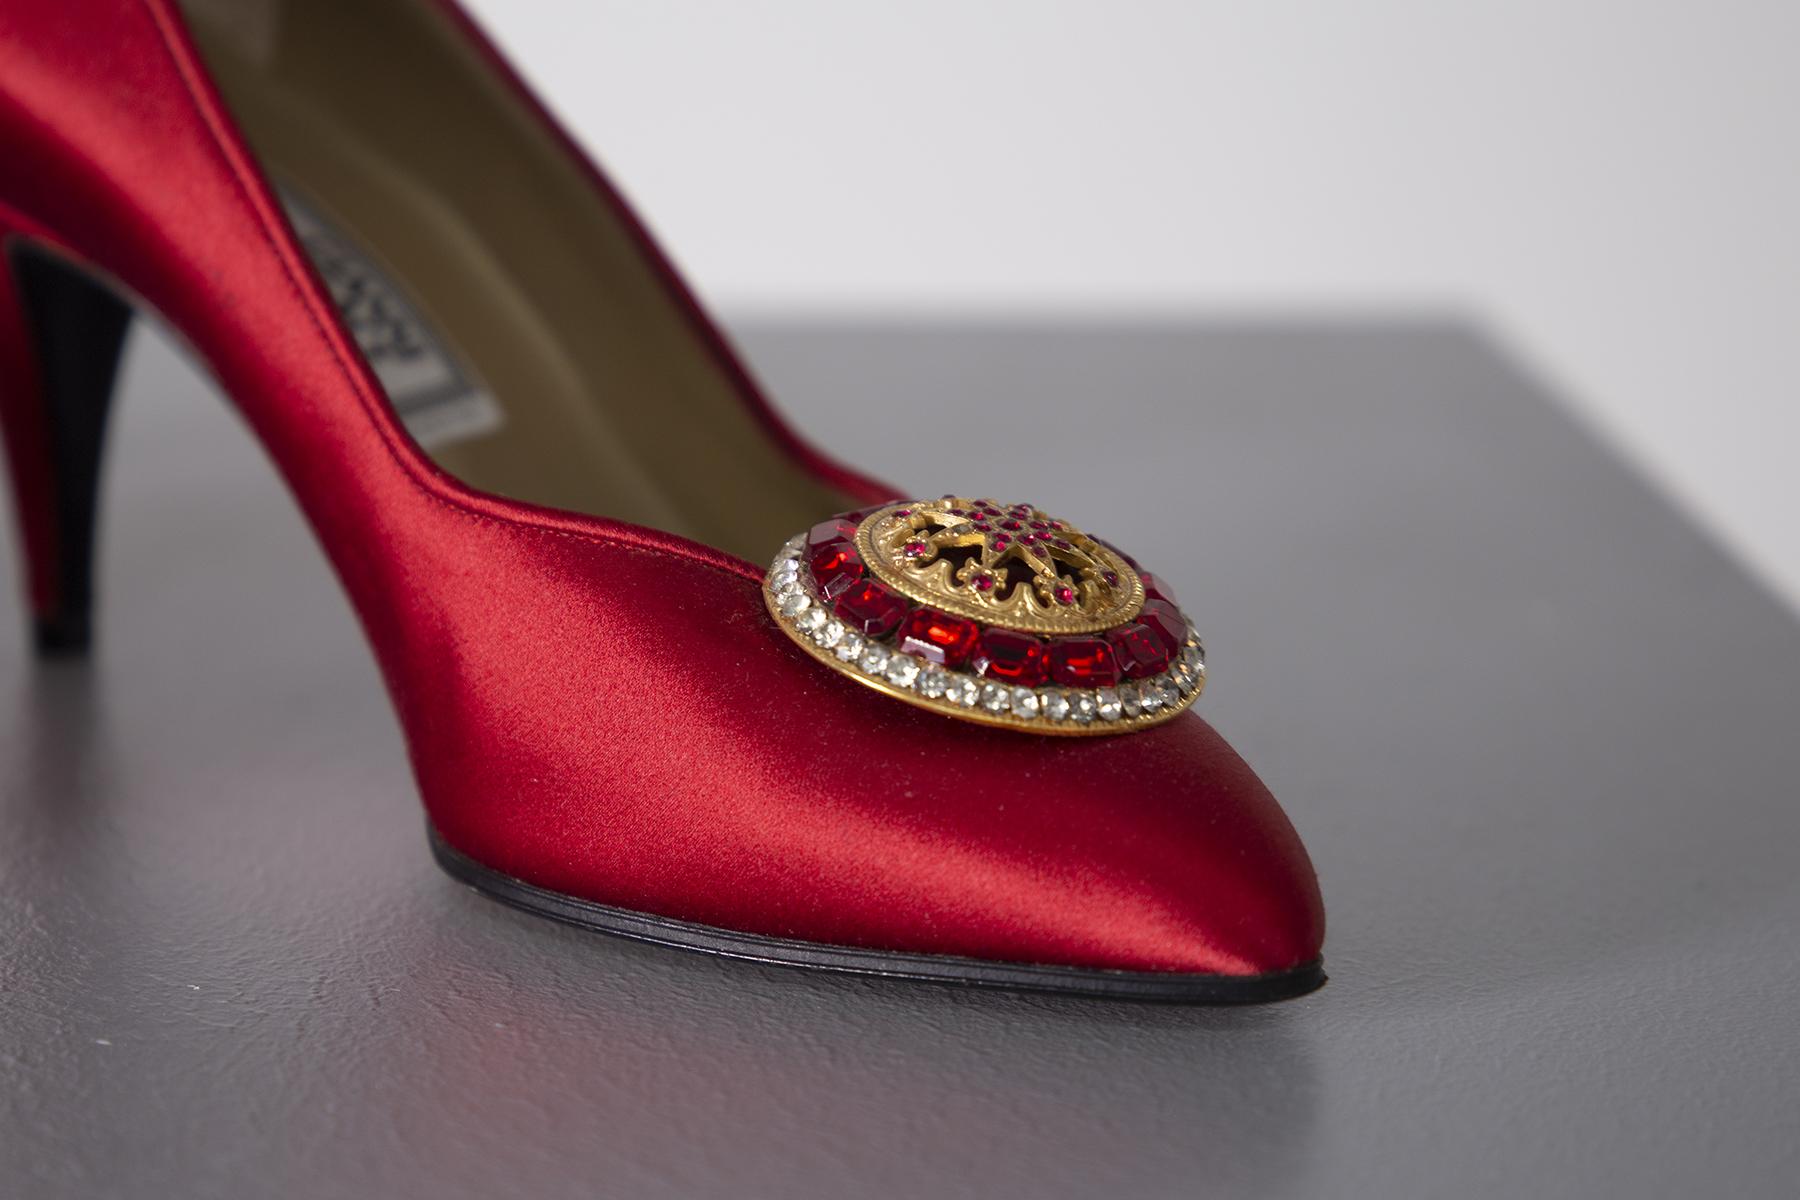 Stunning pair of Gianni Versace decolletè from the 90s. Exceptionally designed and made wonderfully detailed. Gianni Versace's label inside the shoe. The heel measures 7 cm. The shoes are in red satin fabric. The tiara is made of gold metal framed